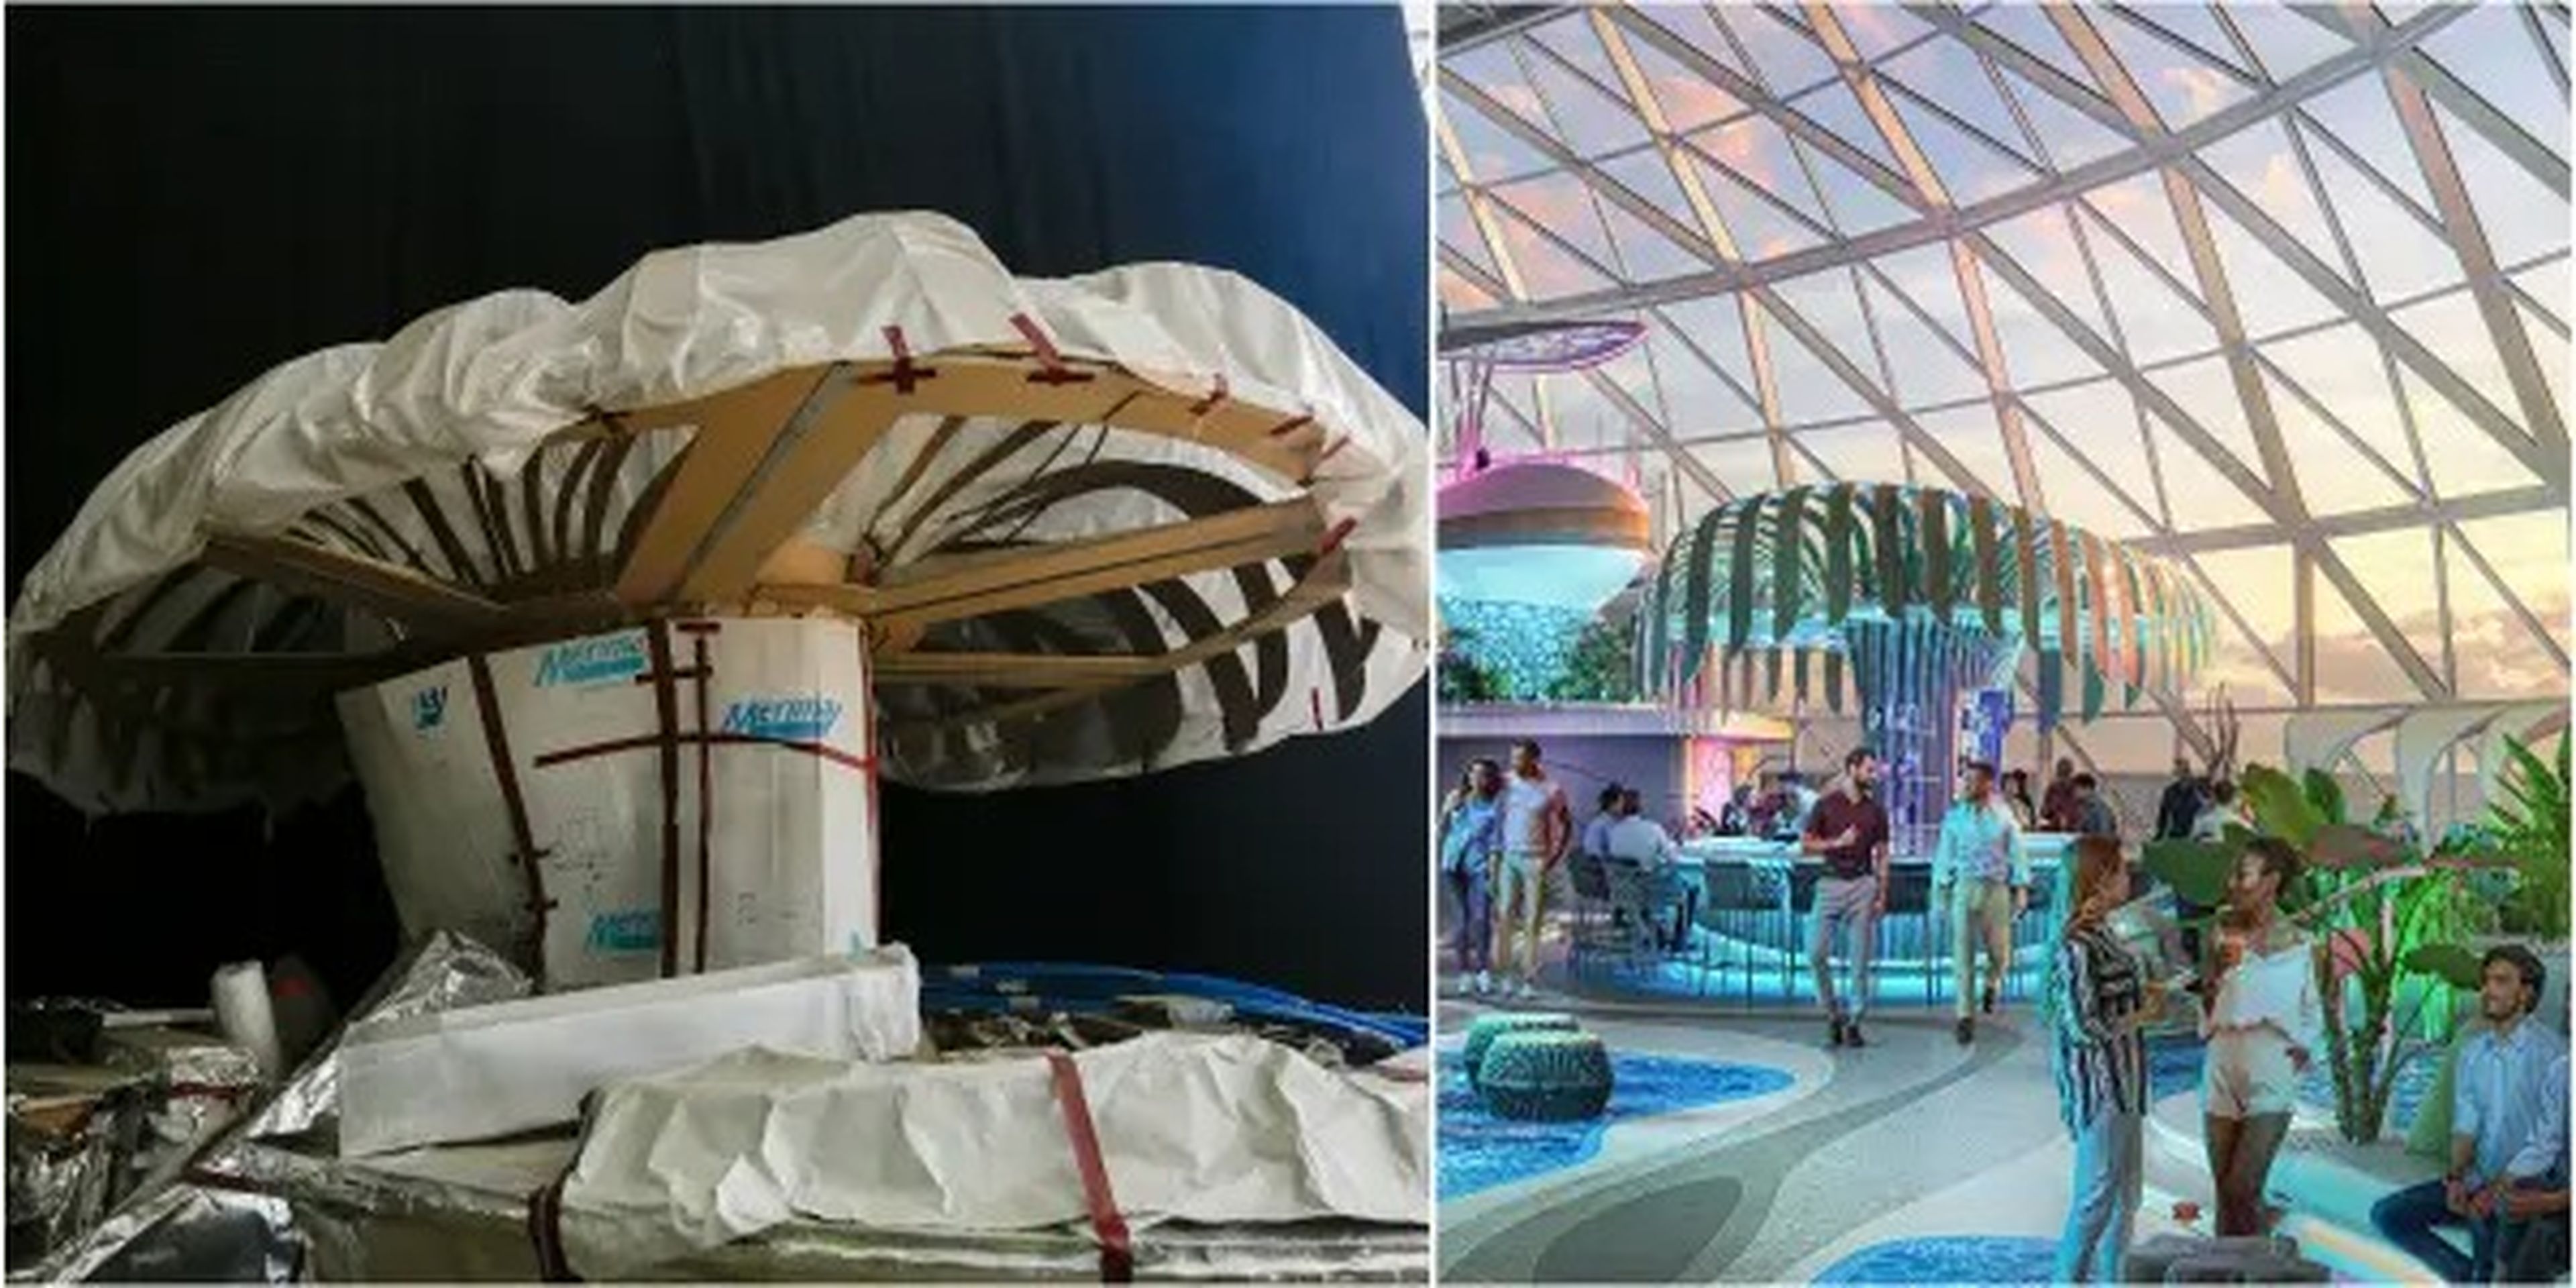 A collage of the Royal Caribbean Icon of the Seas Aquadome under construction compared to renderings of the venue